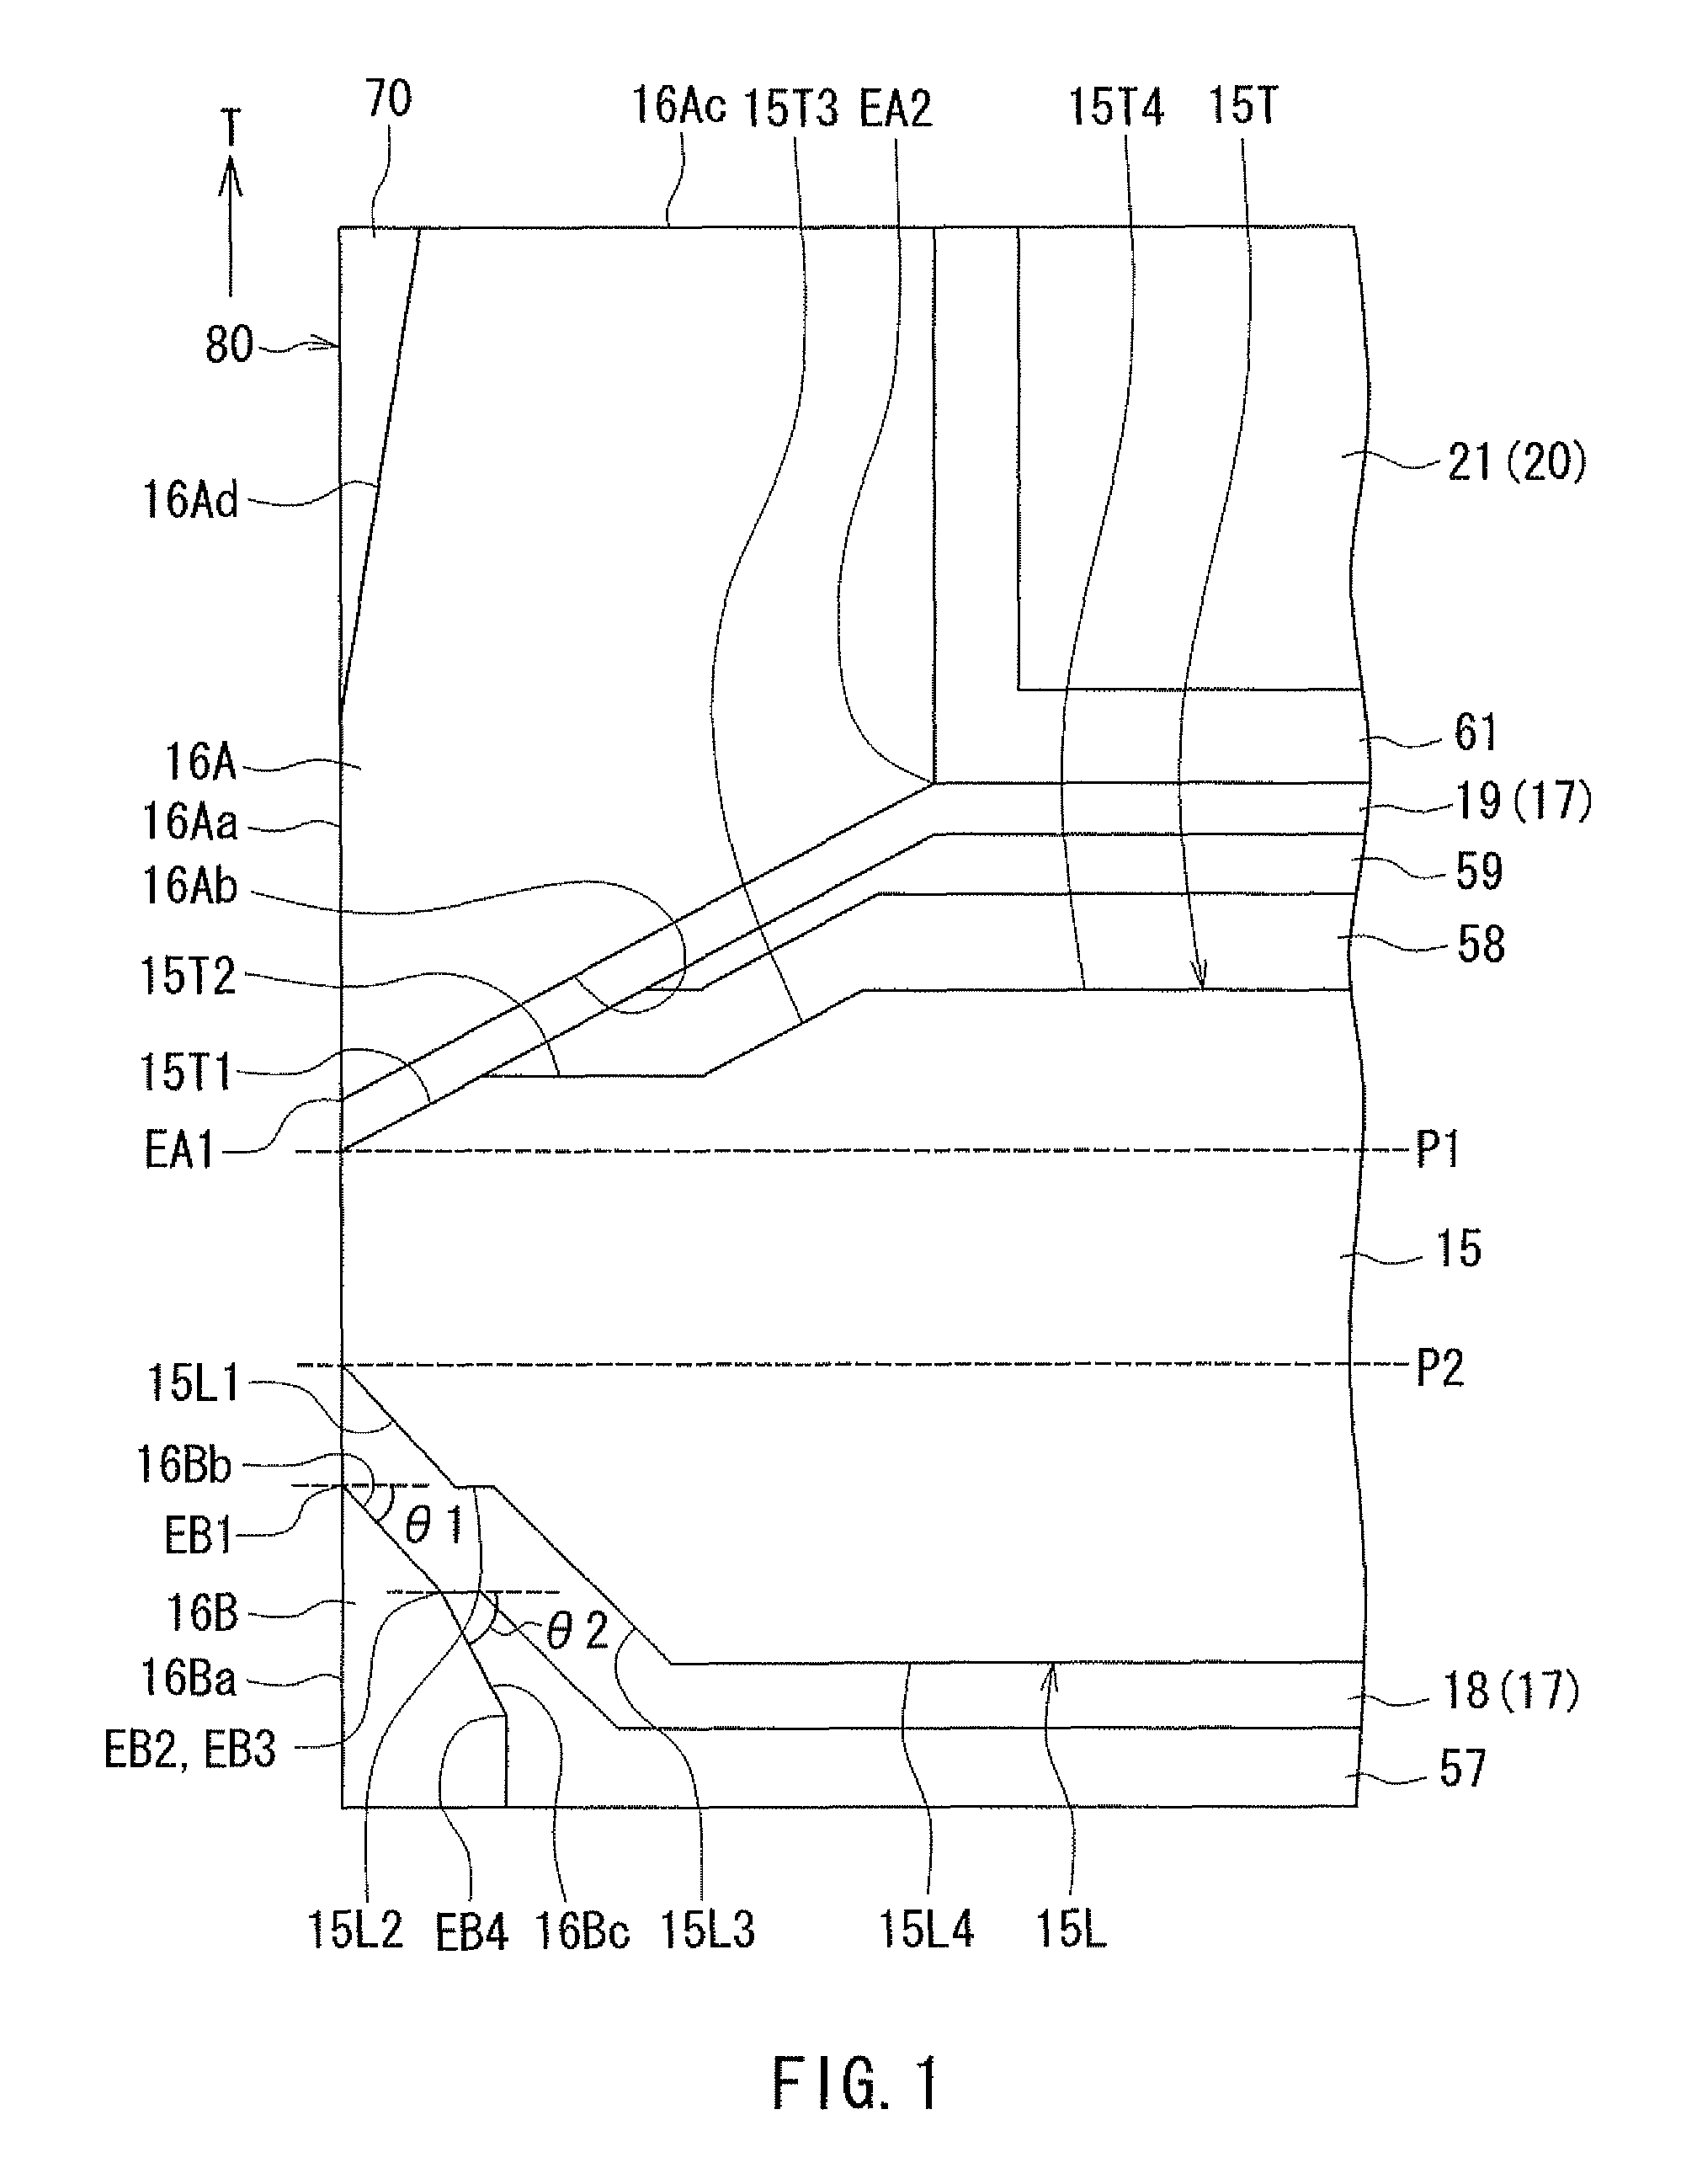 Magnetic head for perpendicular magnetic recording having a main pole and a shield